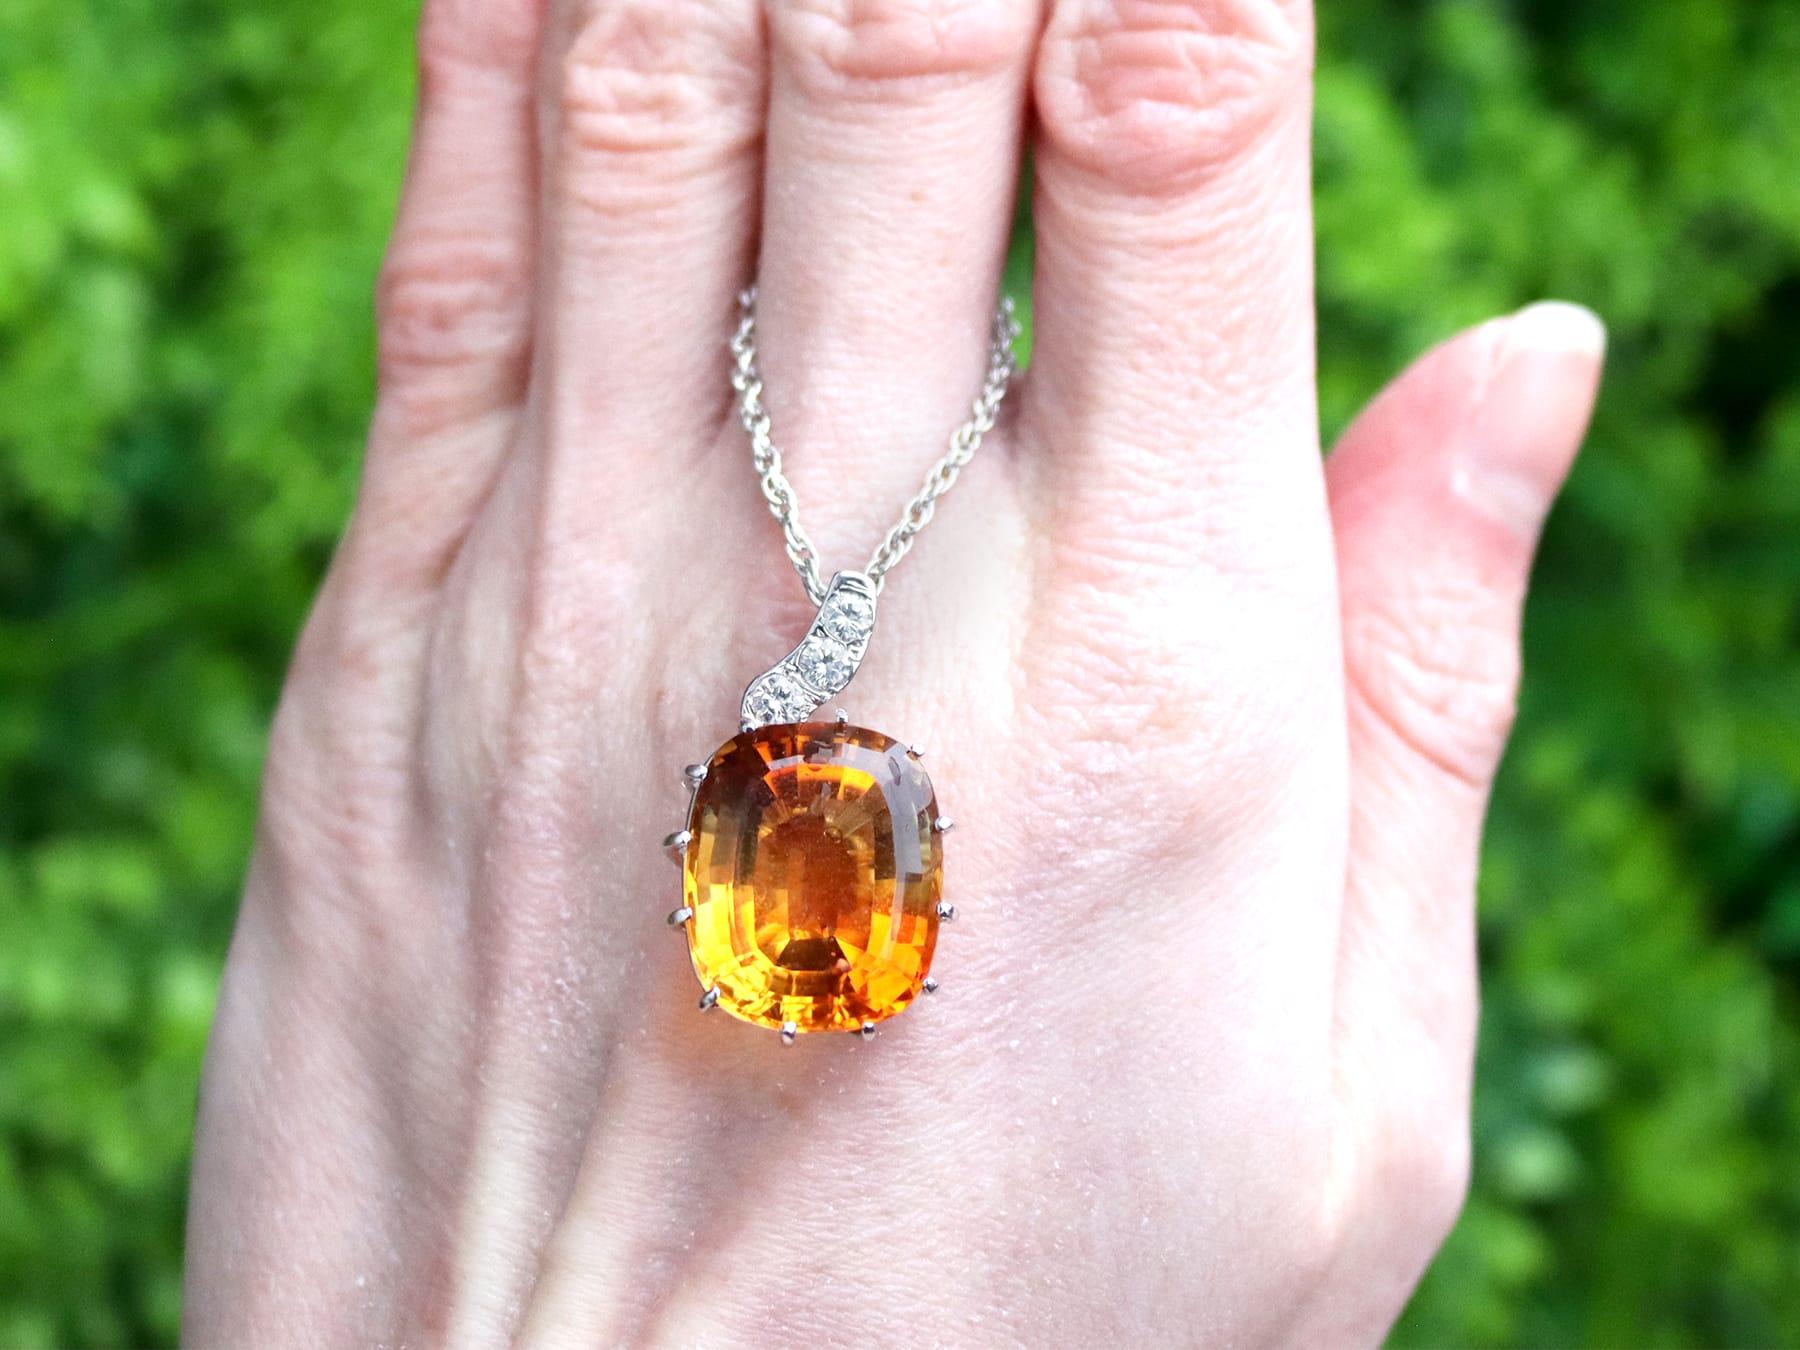 A stunning, fine and impressive vintage 20.12 carat citrine and 0.38 carat diamond, 18 karat yellow gold pendant; part of our diverse gemstone jewellery collections

This stunning, fine and impressive vintage pendant has been crafted in 18k white